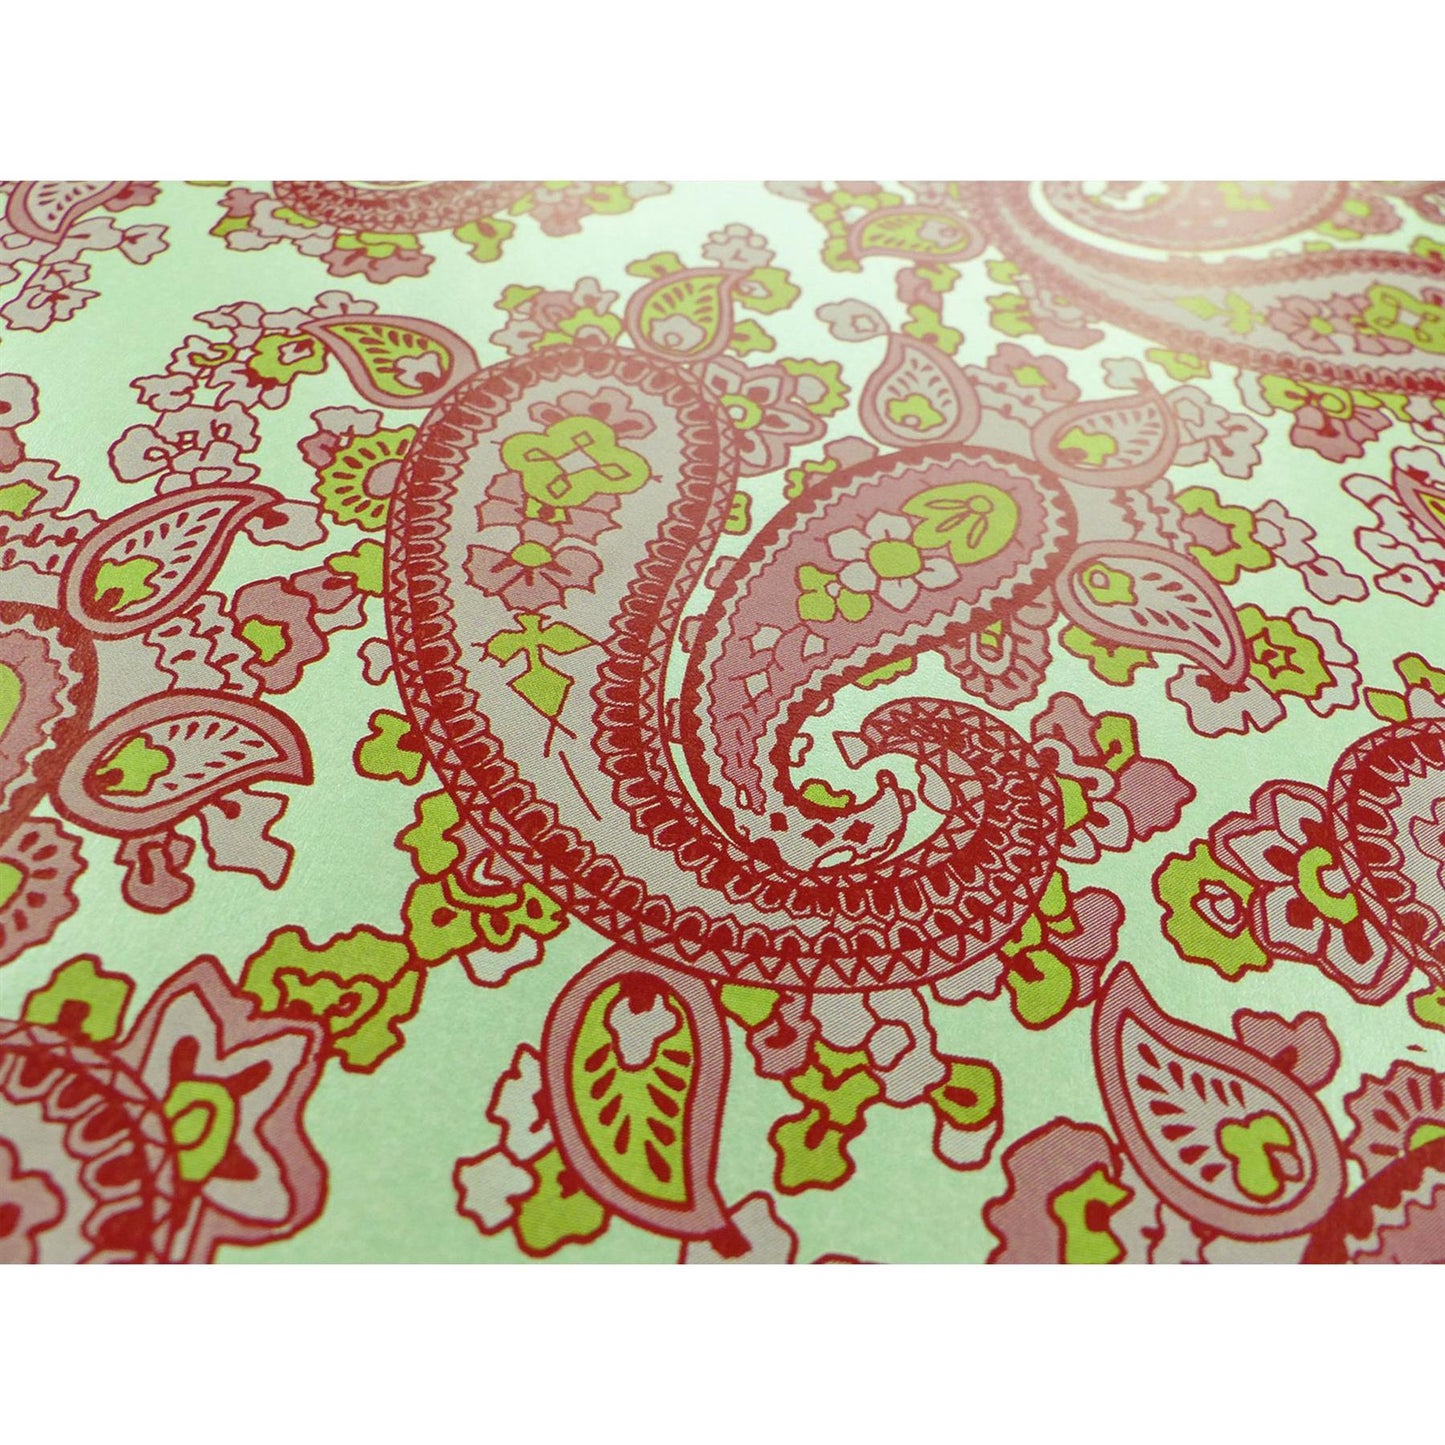 [Luthitec] Mint Green Backed Pink Paisley Paper Guitar Body Decal - 420x295mm